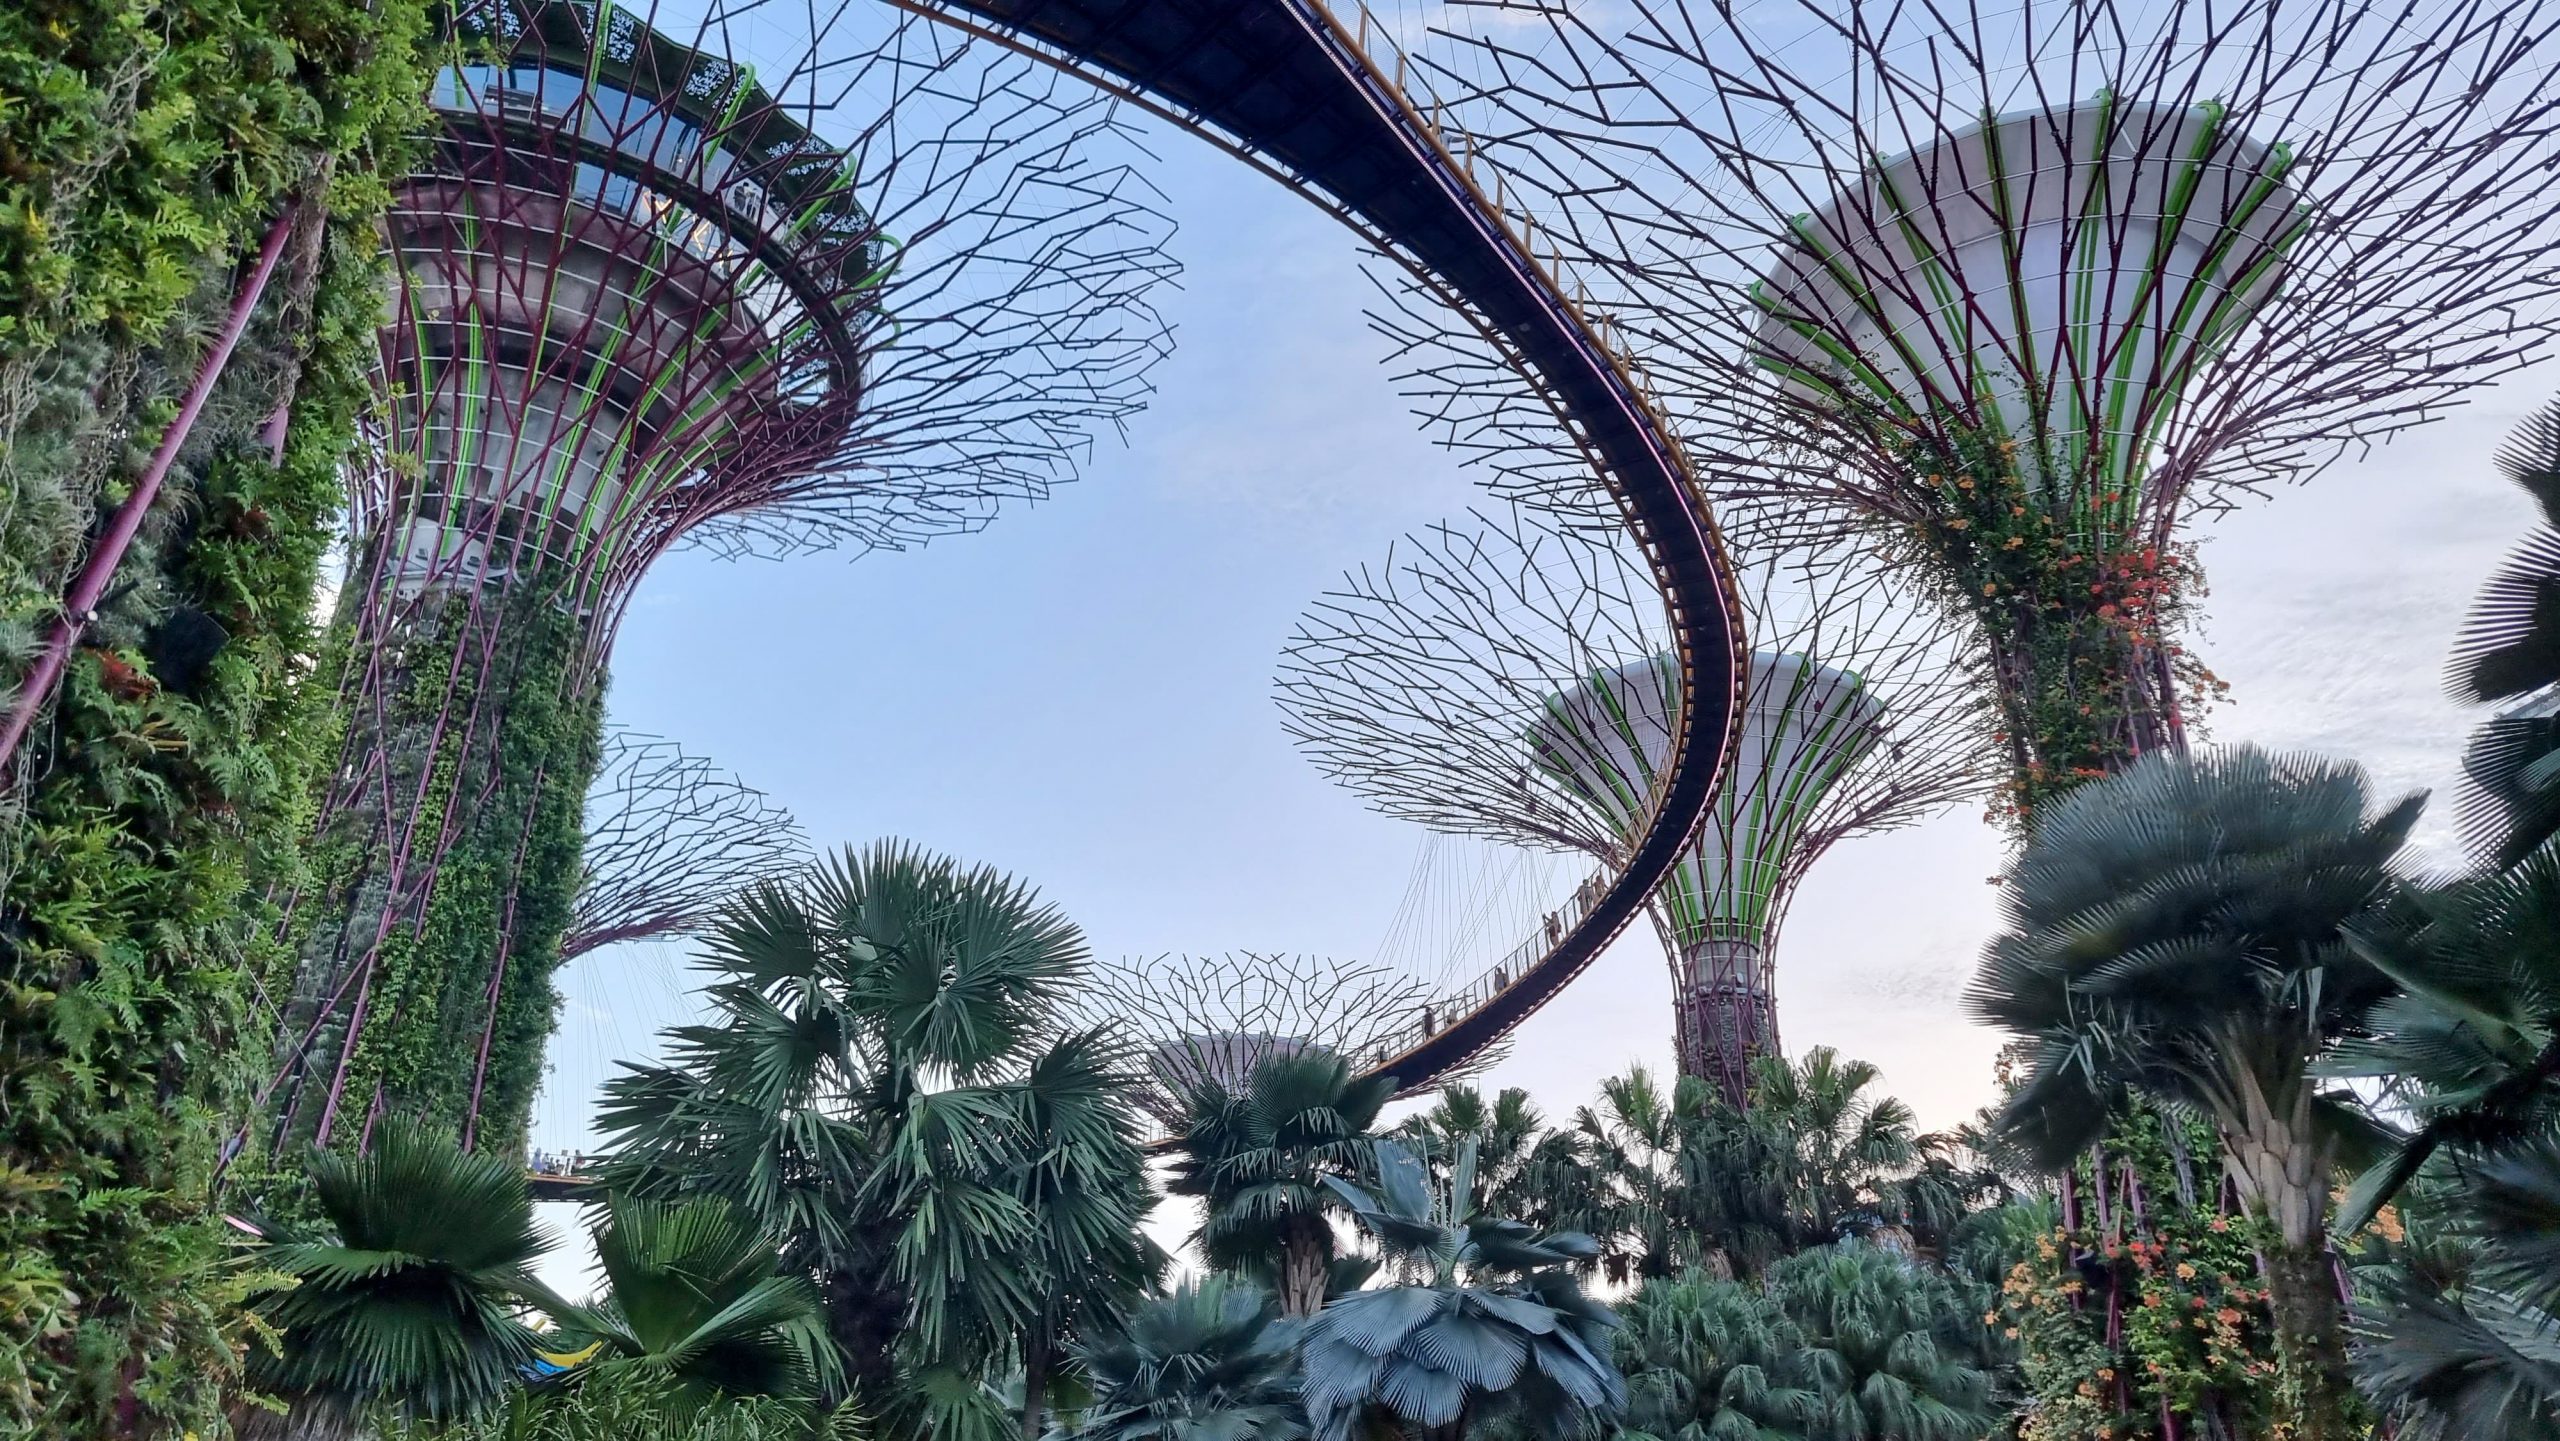 Singapore OCBC Skyway in the Gardens by the Bay Botanical Gardens